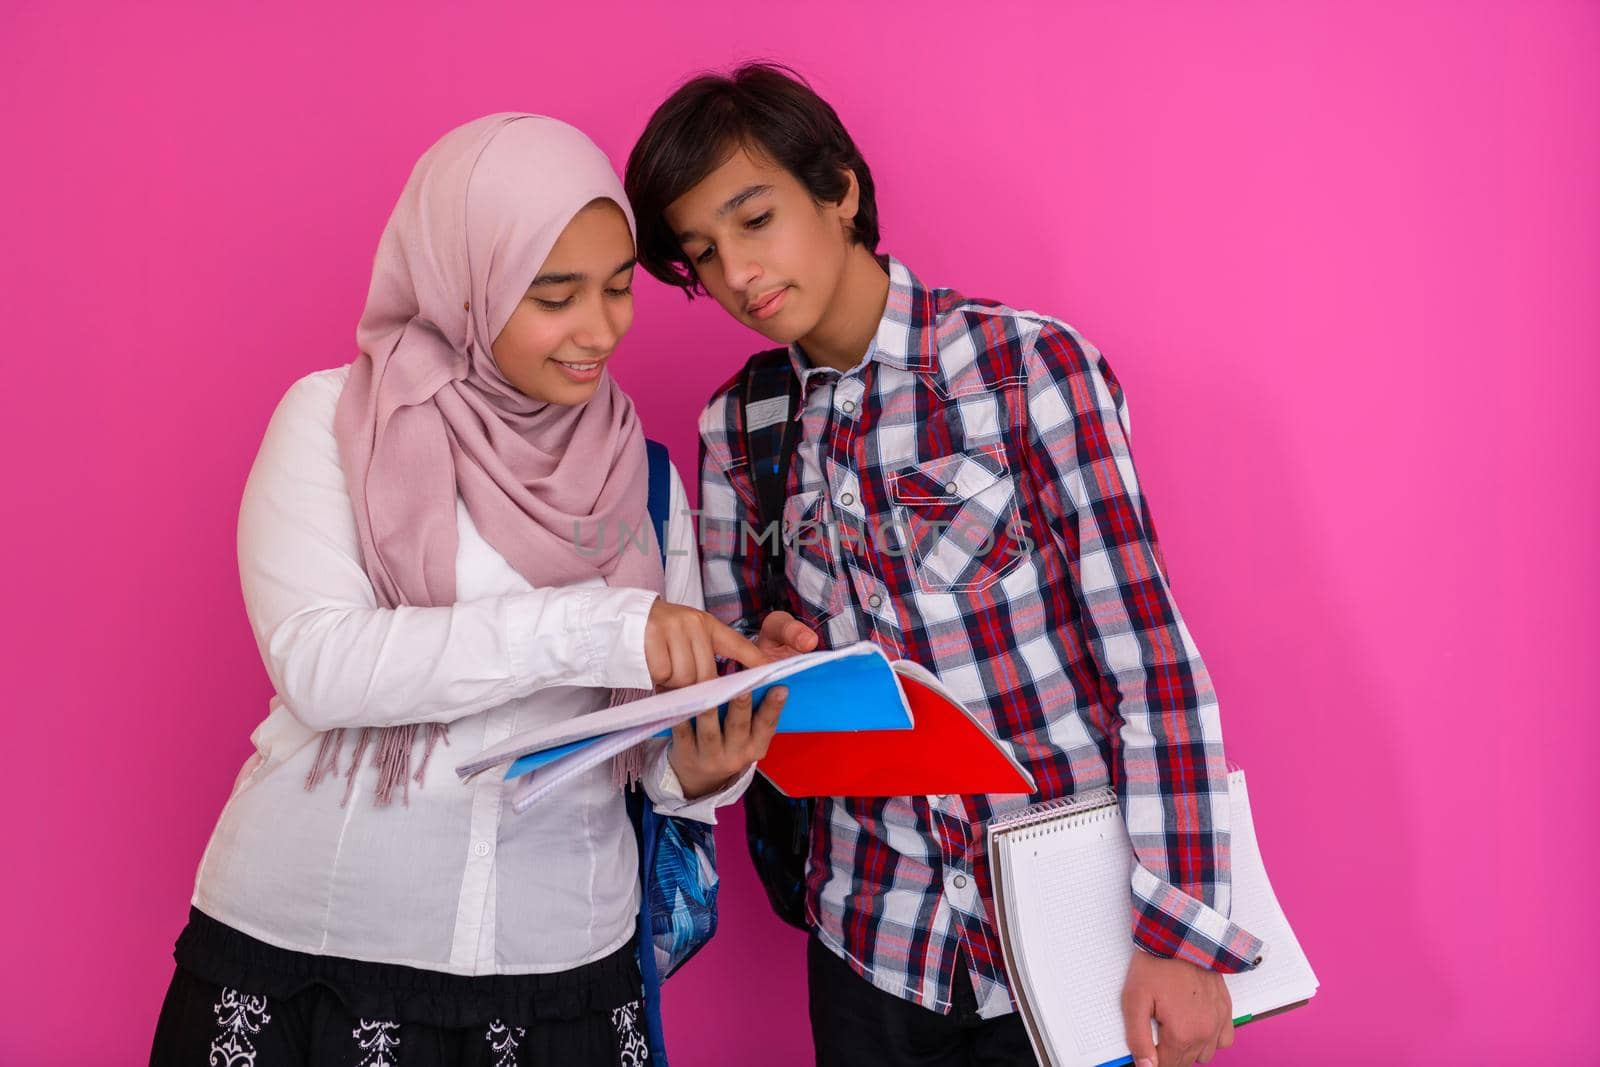 Arabic teenagers group, students team walking forward in future and back to school concept pink background. Selective focus. High quality photo